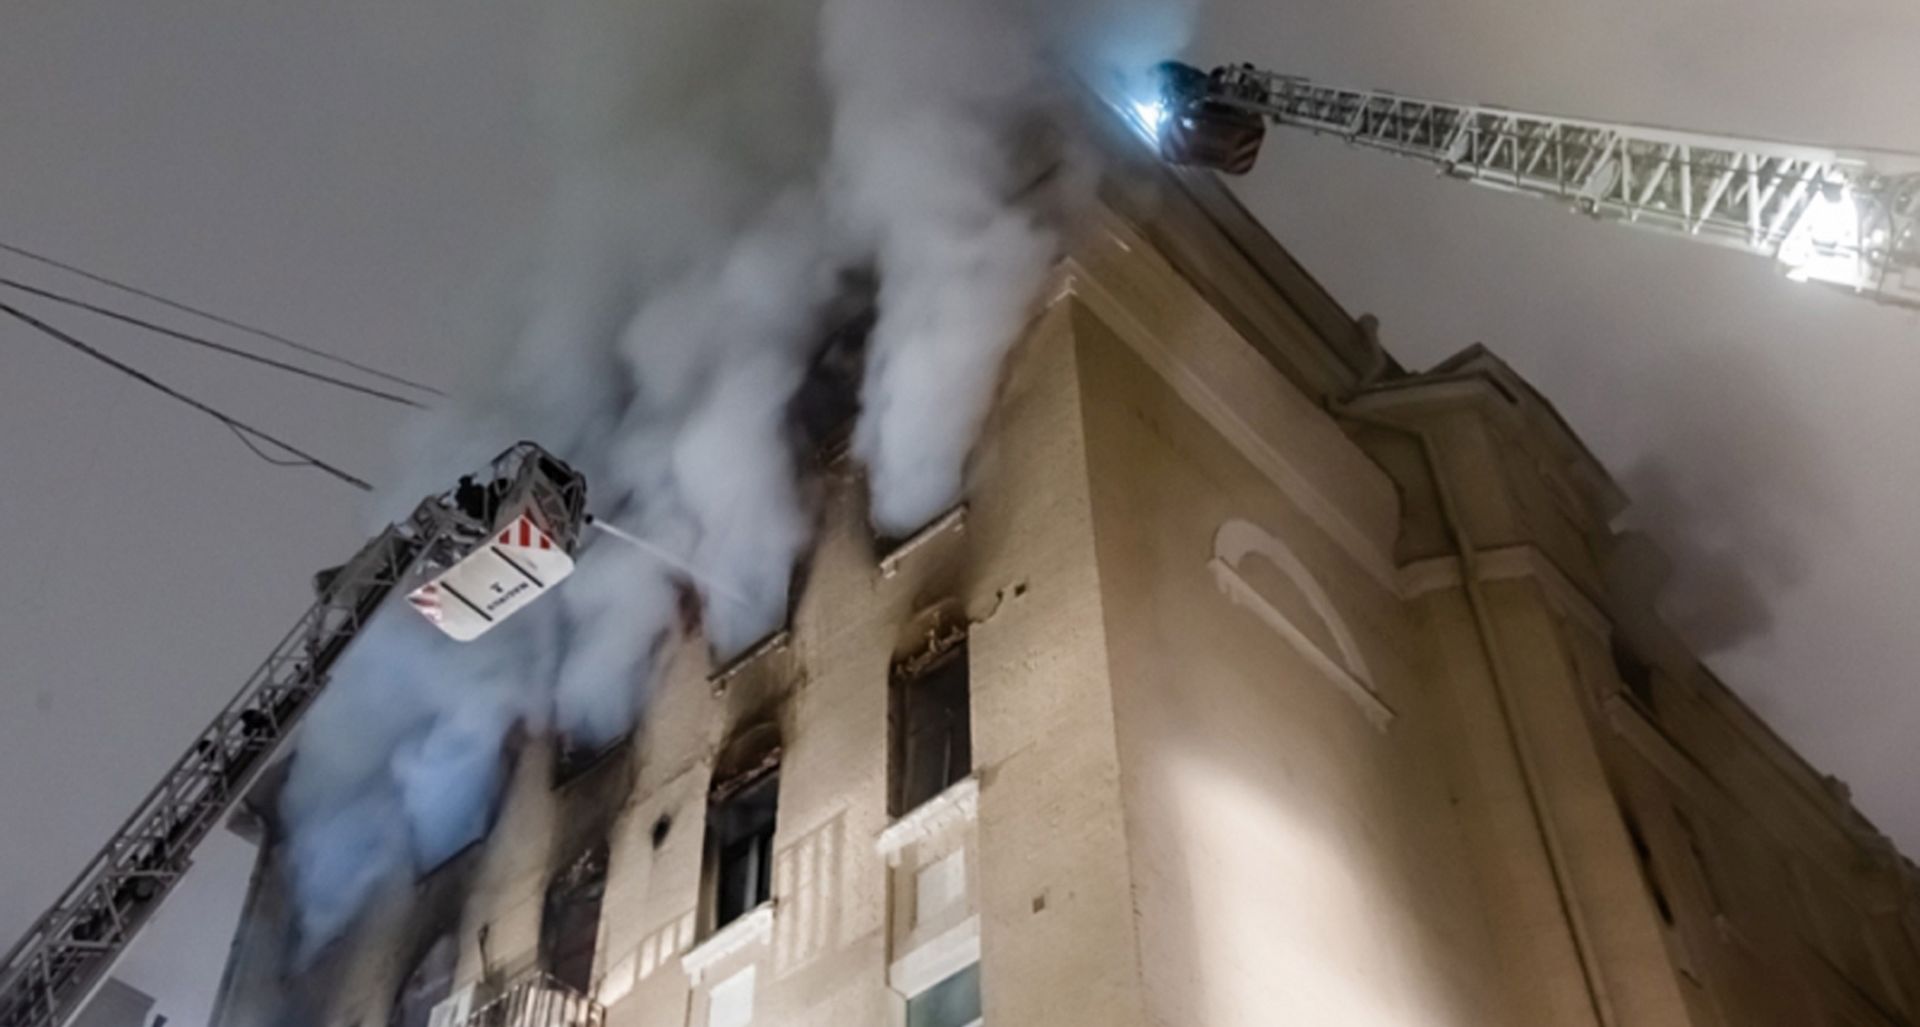 epa07342547 A handout photo made available by the Moscow Branch of the Russian Emergencies Ministry shows firefighters extinguishing a fire in a residential building in central Moscow, Russia, 04 February 2019. Six people were killed in the fire which broke out in the early hours of 04 February 2019.  EPA/RUSSIAN EMERGENCY MINISTRY / HANDOUT BEST QUALITY AVAILABLE / HANDOUT EDITORIAL USE ONLY/NO SALES HANDOUT EDITORIAL USE ONLY/NO SALES